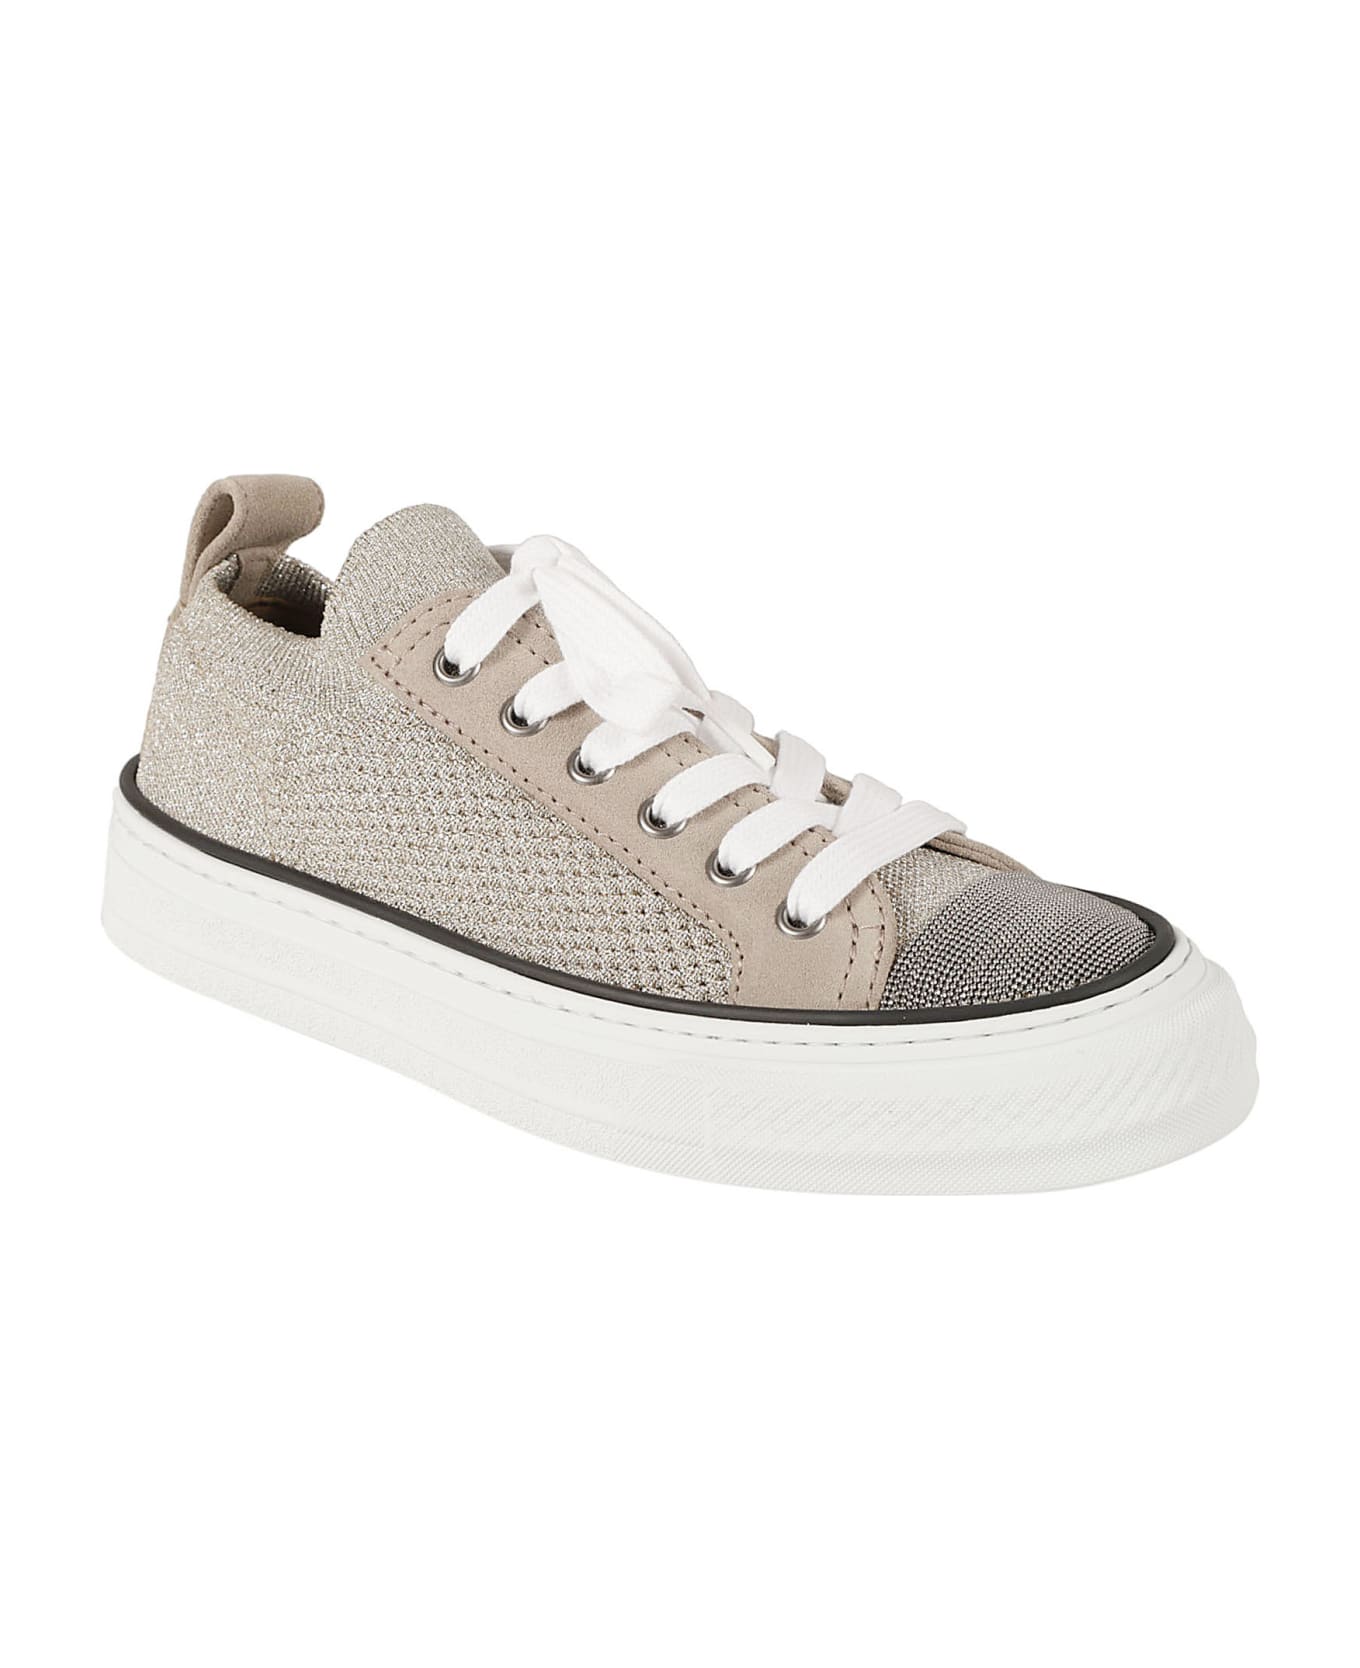 Brunello Cucinelli Pair Of Sneakers - Sand